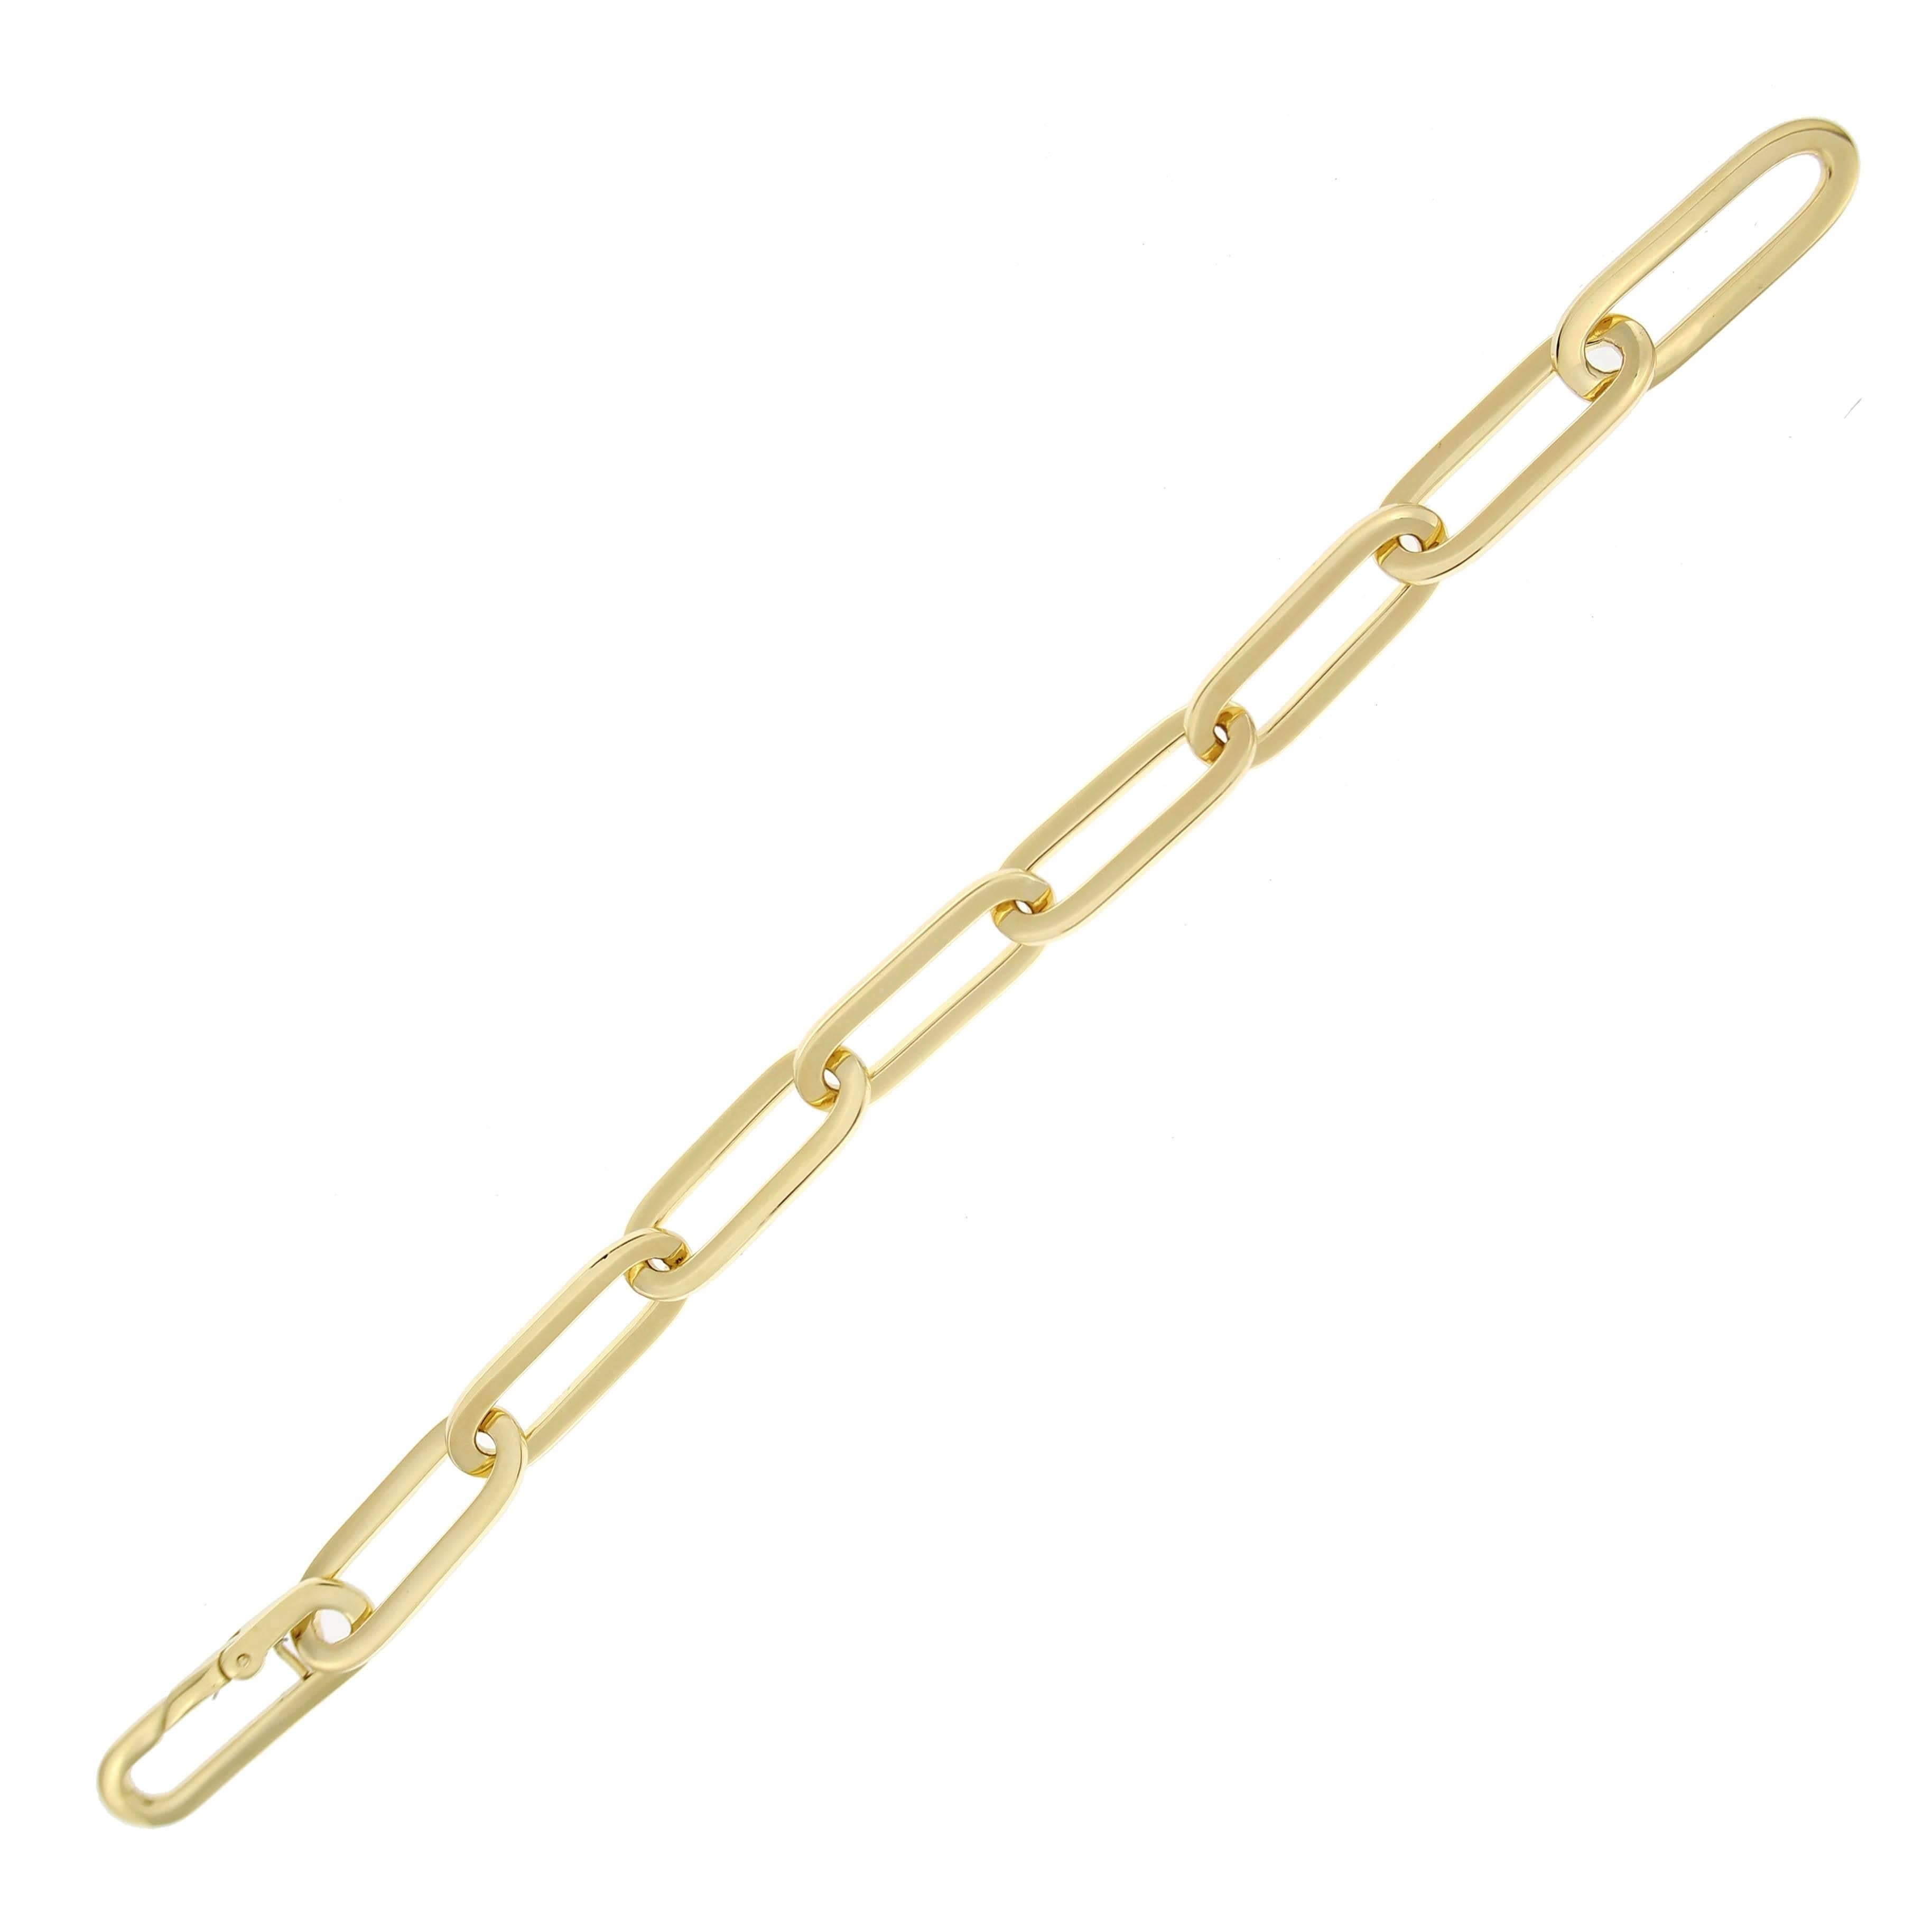 Alex Jona design collection, hand crafted in Italy, 18 karat yellow gold 8.46 in. long chain bracelet.
All Jona jewelry is new and has never been previously owned or worn. Each item will arrive at your door beautifully gift wrapped in Jona boxes,